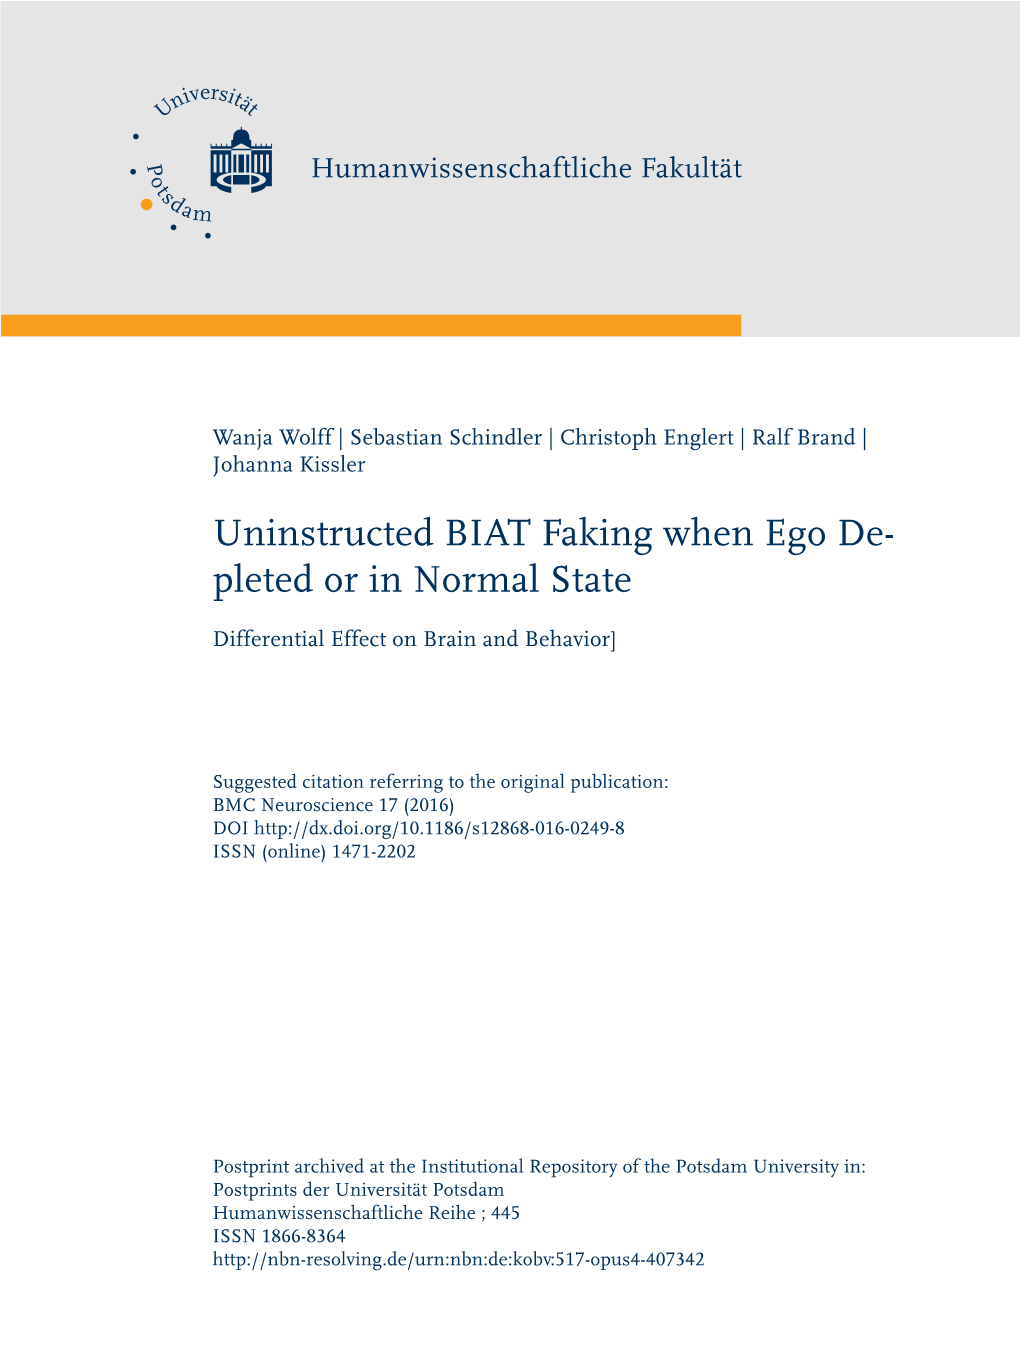 Uninstructed BIAT Faking When Ego Depleted Or in Normal